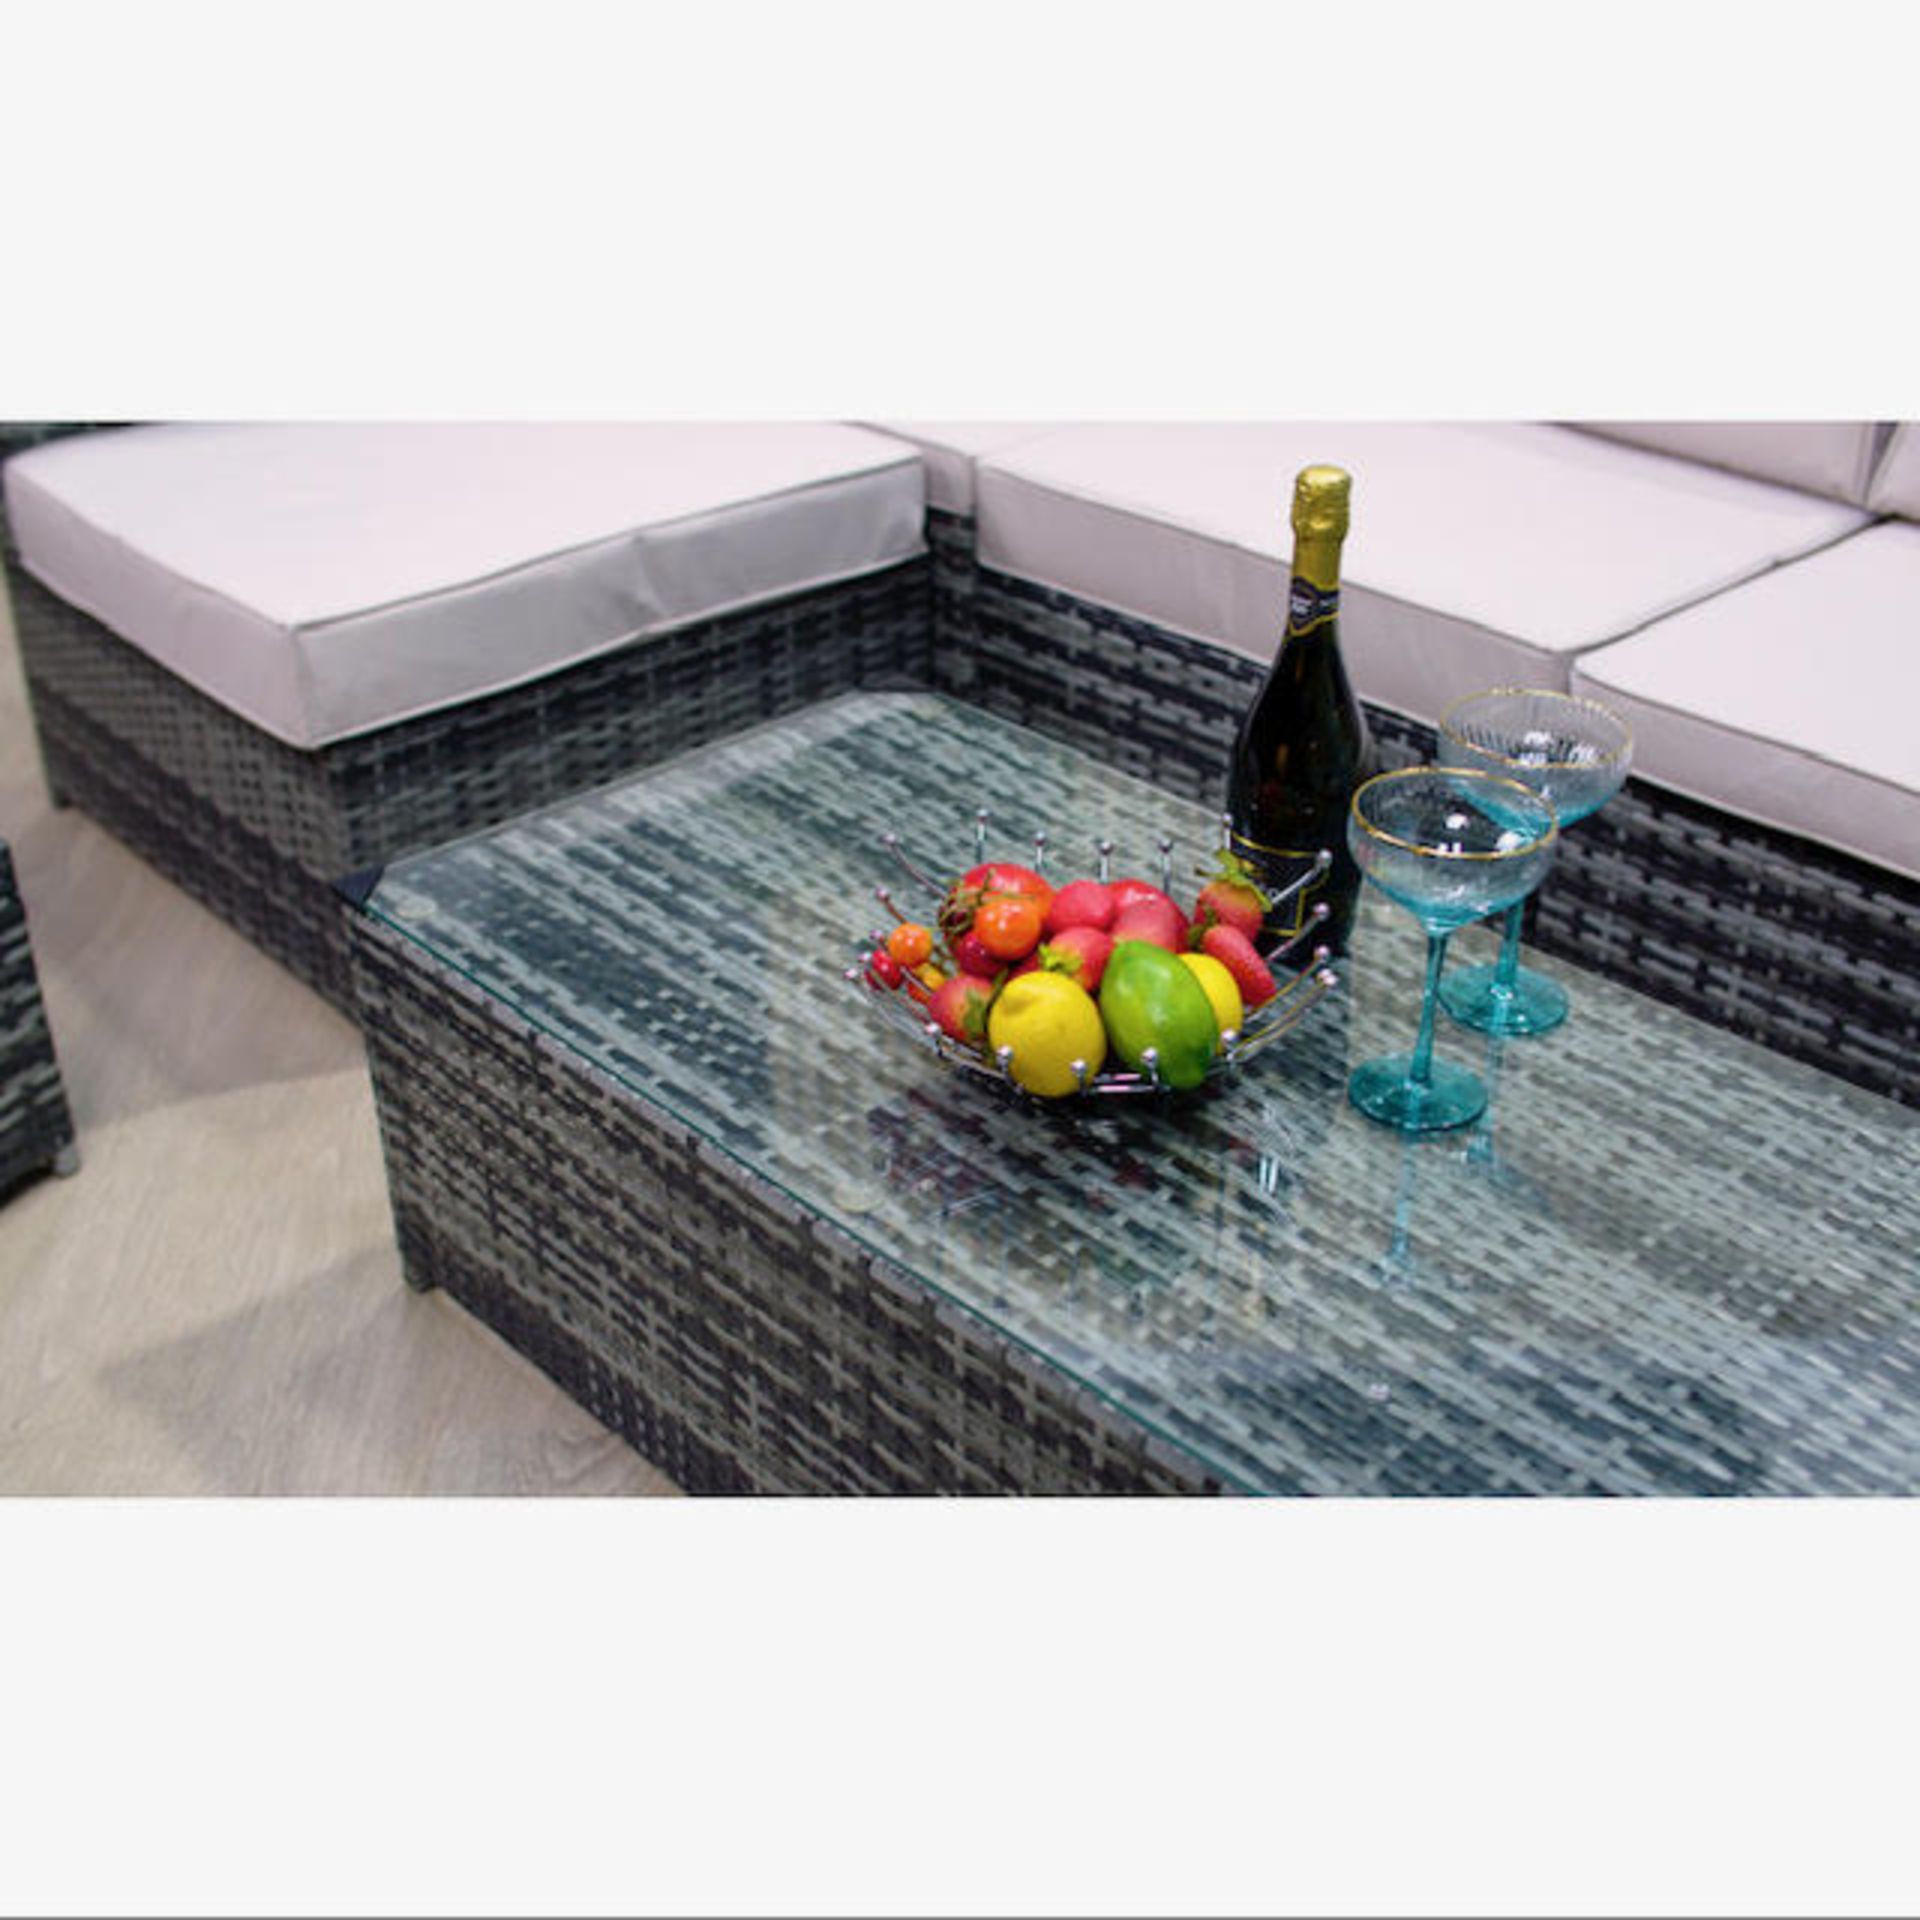 BRAND NEW LINEA 7 PIECE LUXURY RATTAN SETS RRP £1499 EACH. PERFECT FOR THOSE SUMMER NIGHTS FOR - Image 5 of 6